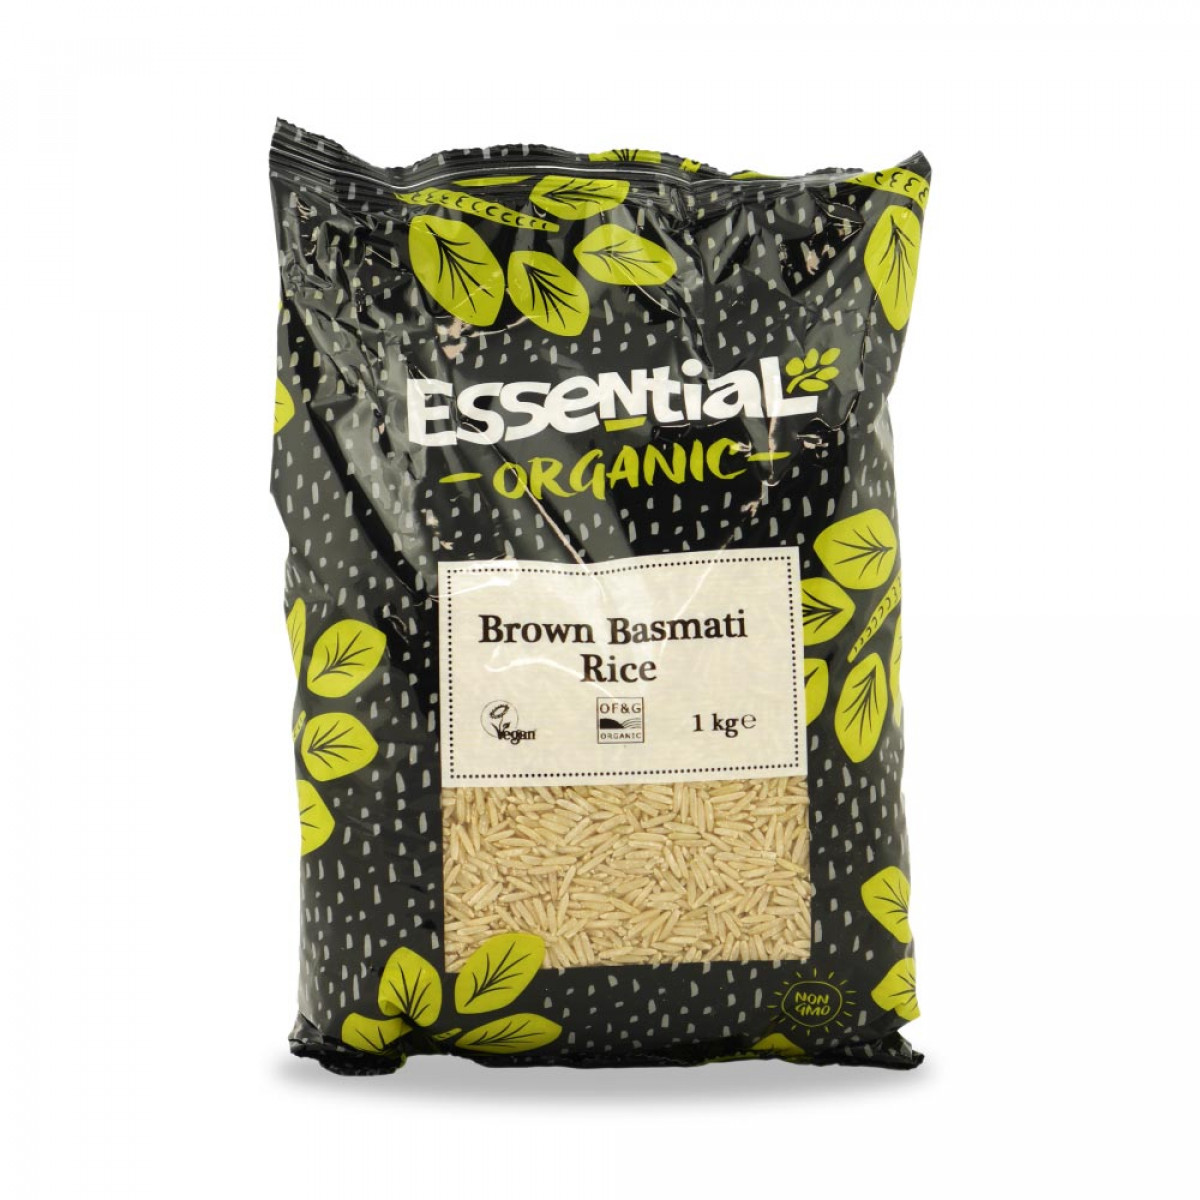 Product picture for Basmati Brown